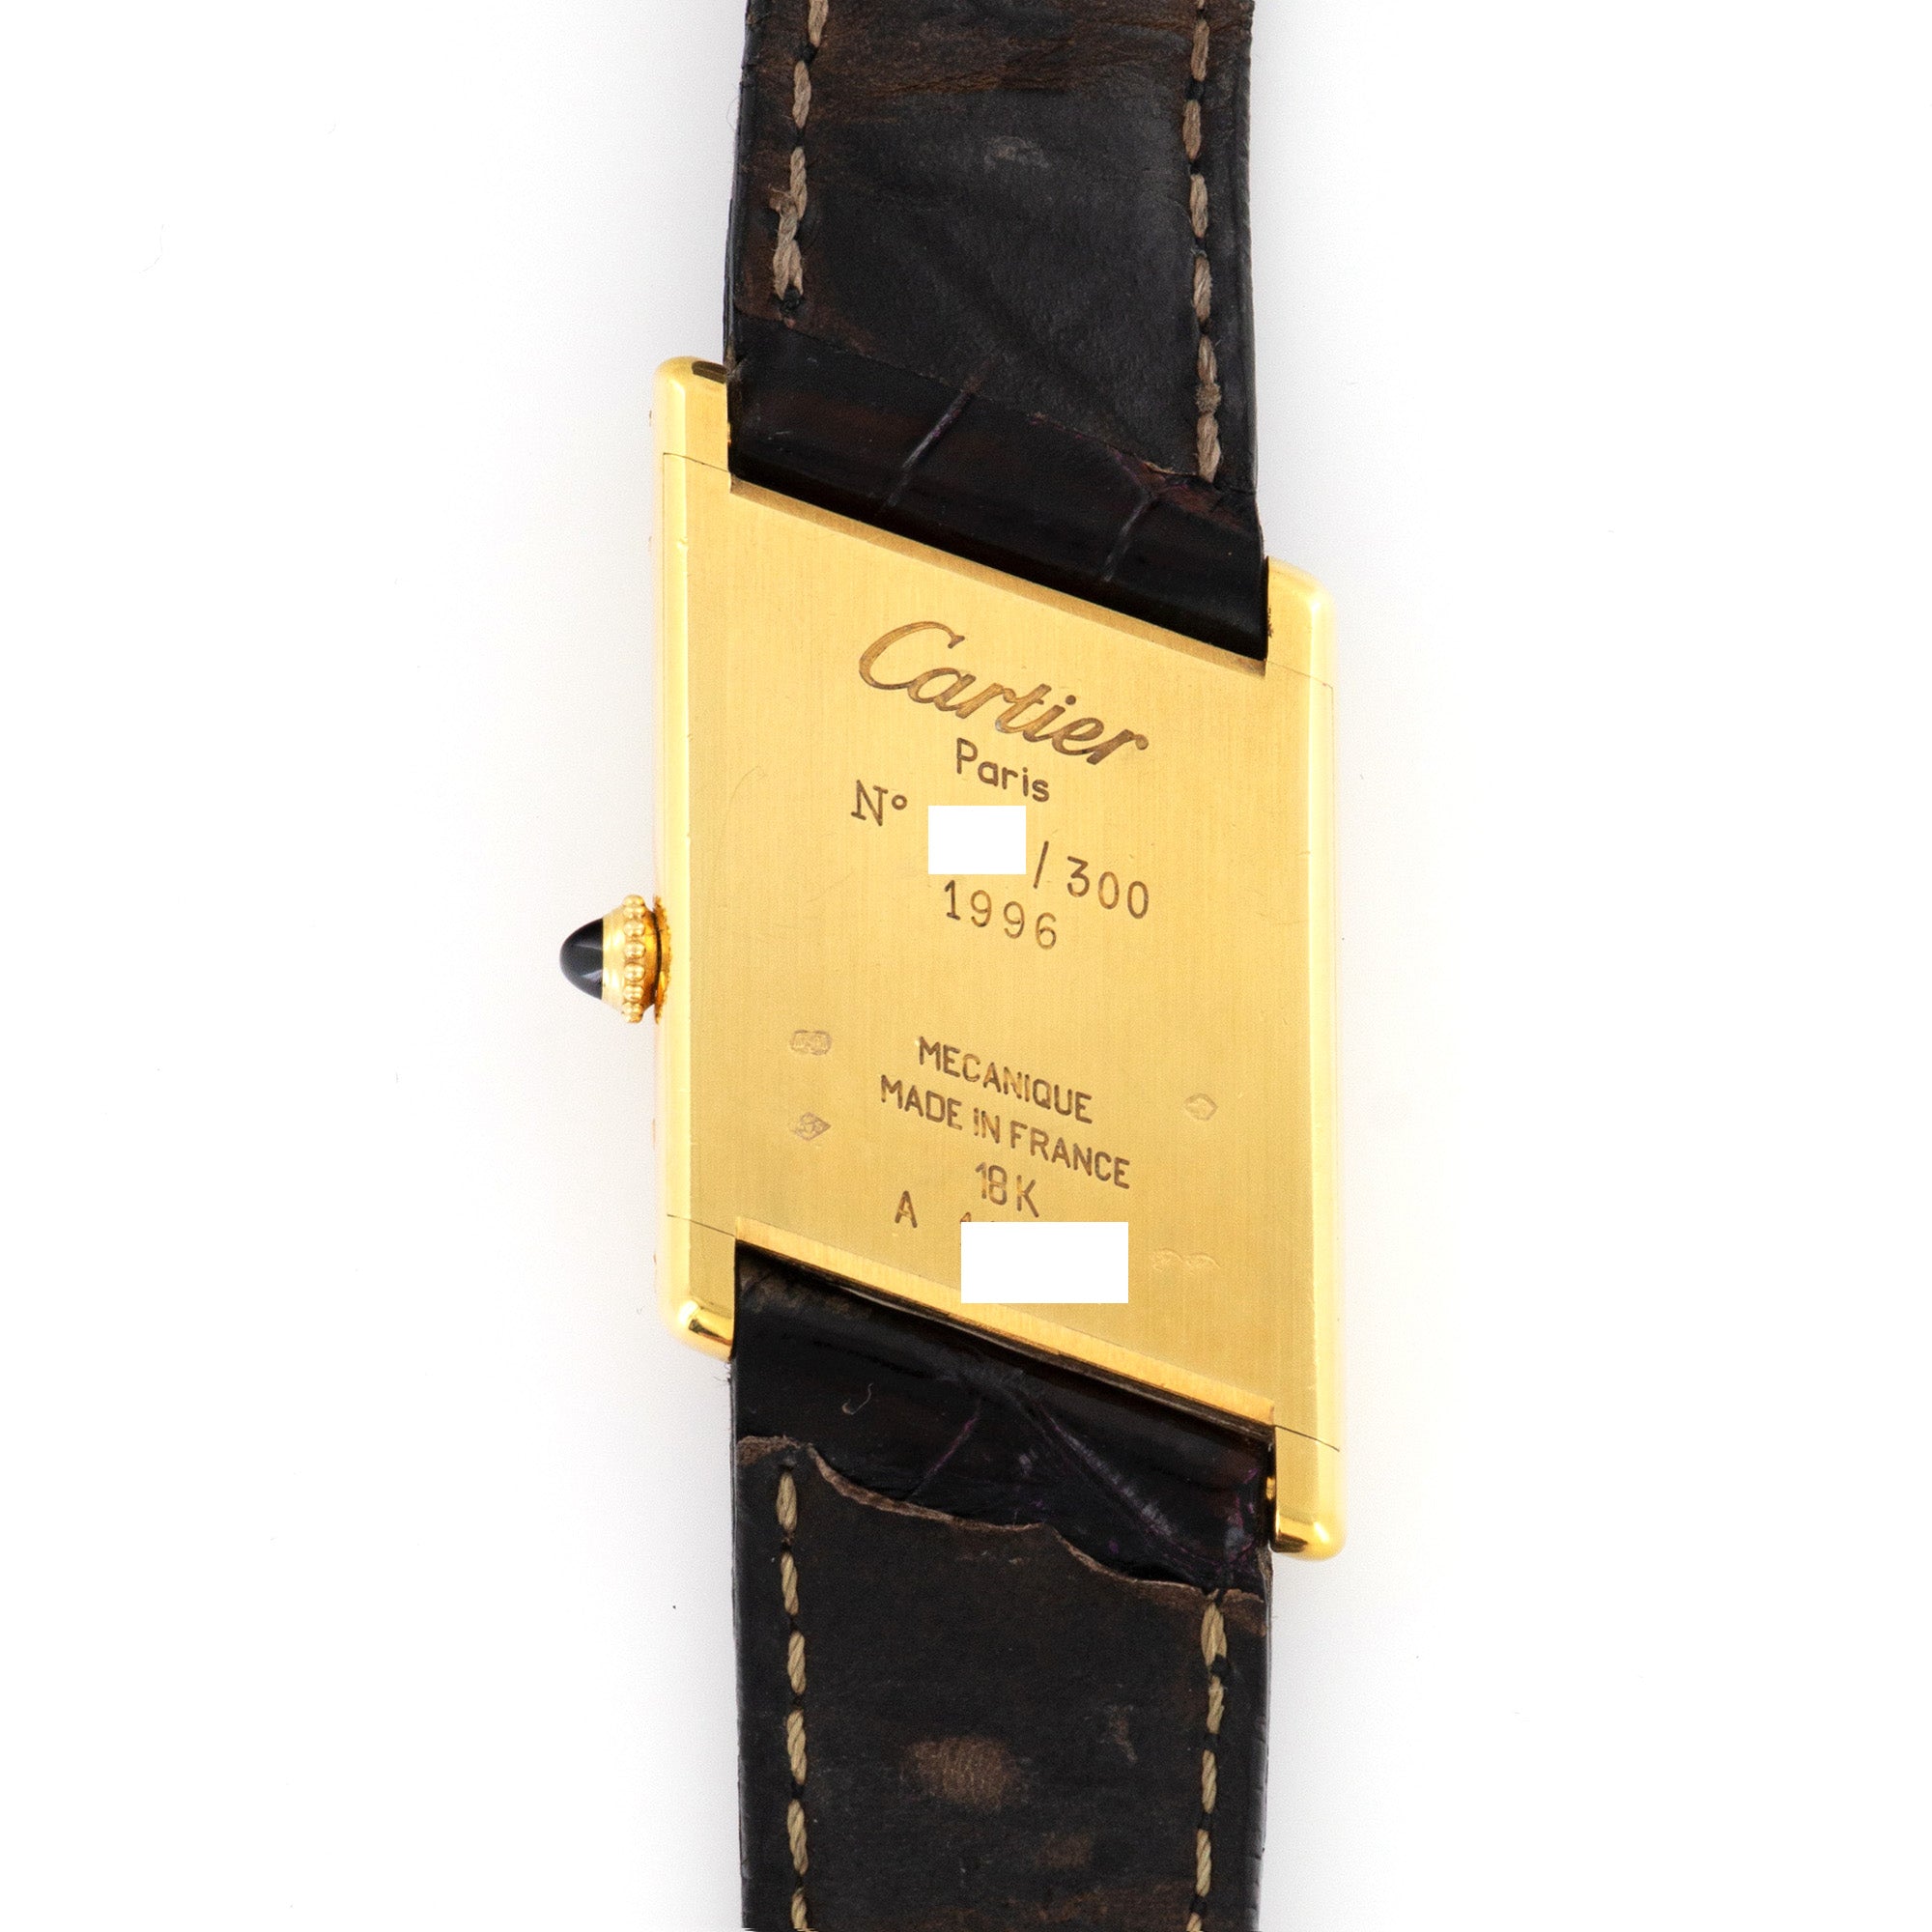 Cartier - Cartier Yellow Gold Asymmetrical Tank Watch, with Original Box and Certificate - The Keystone Watches